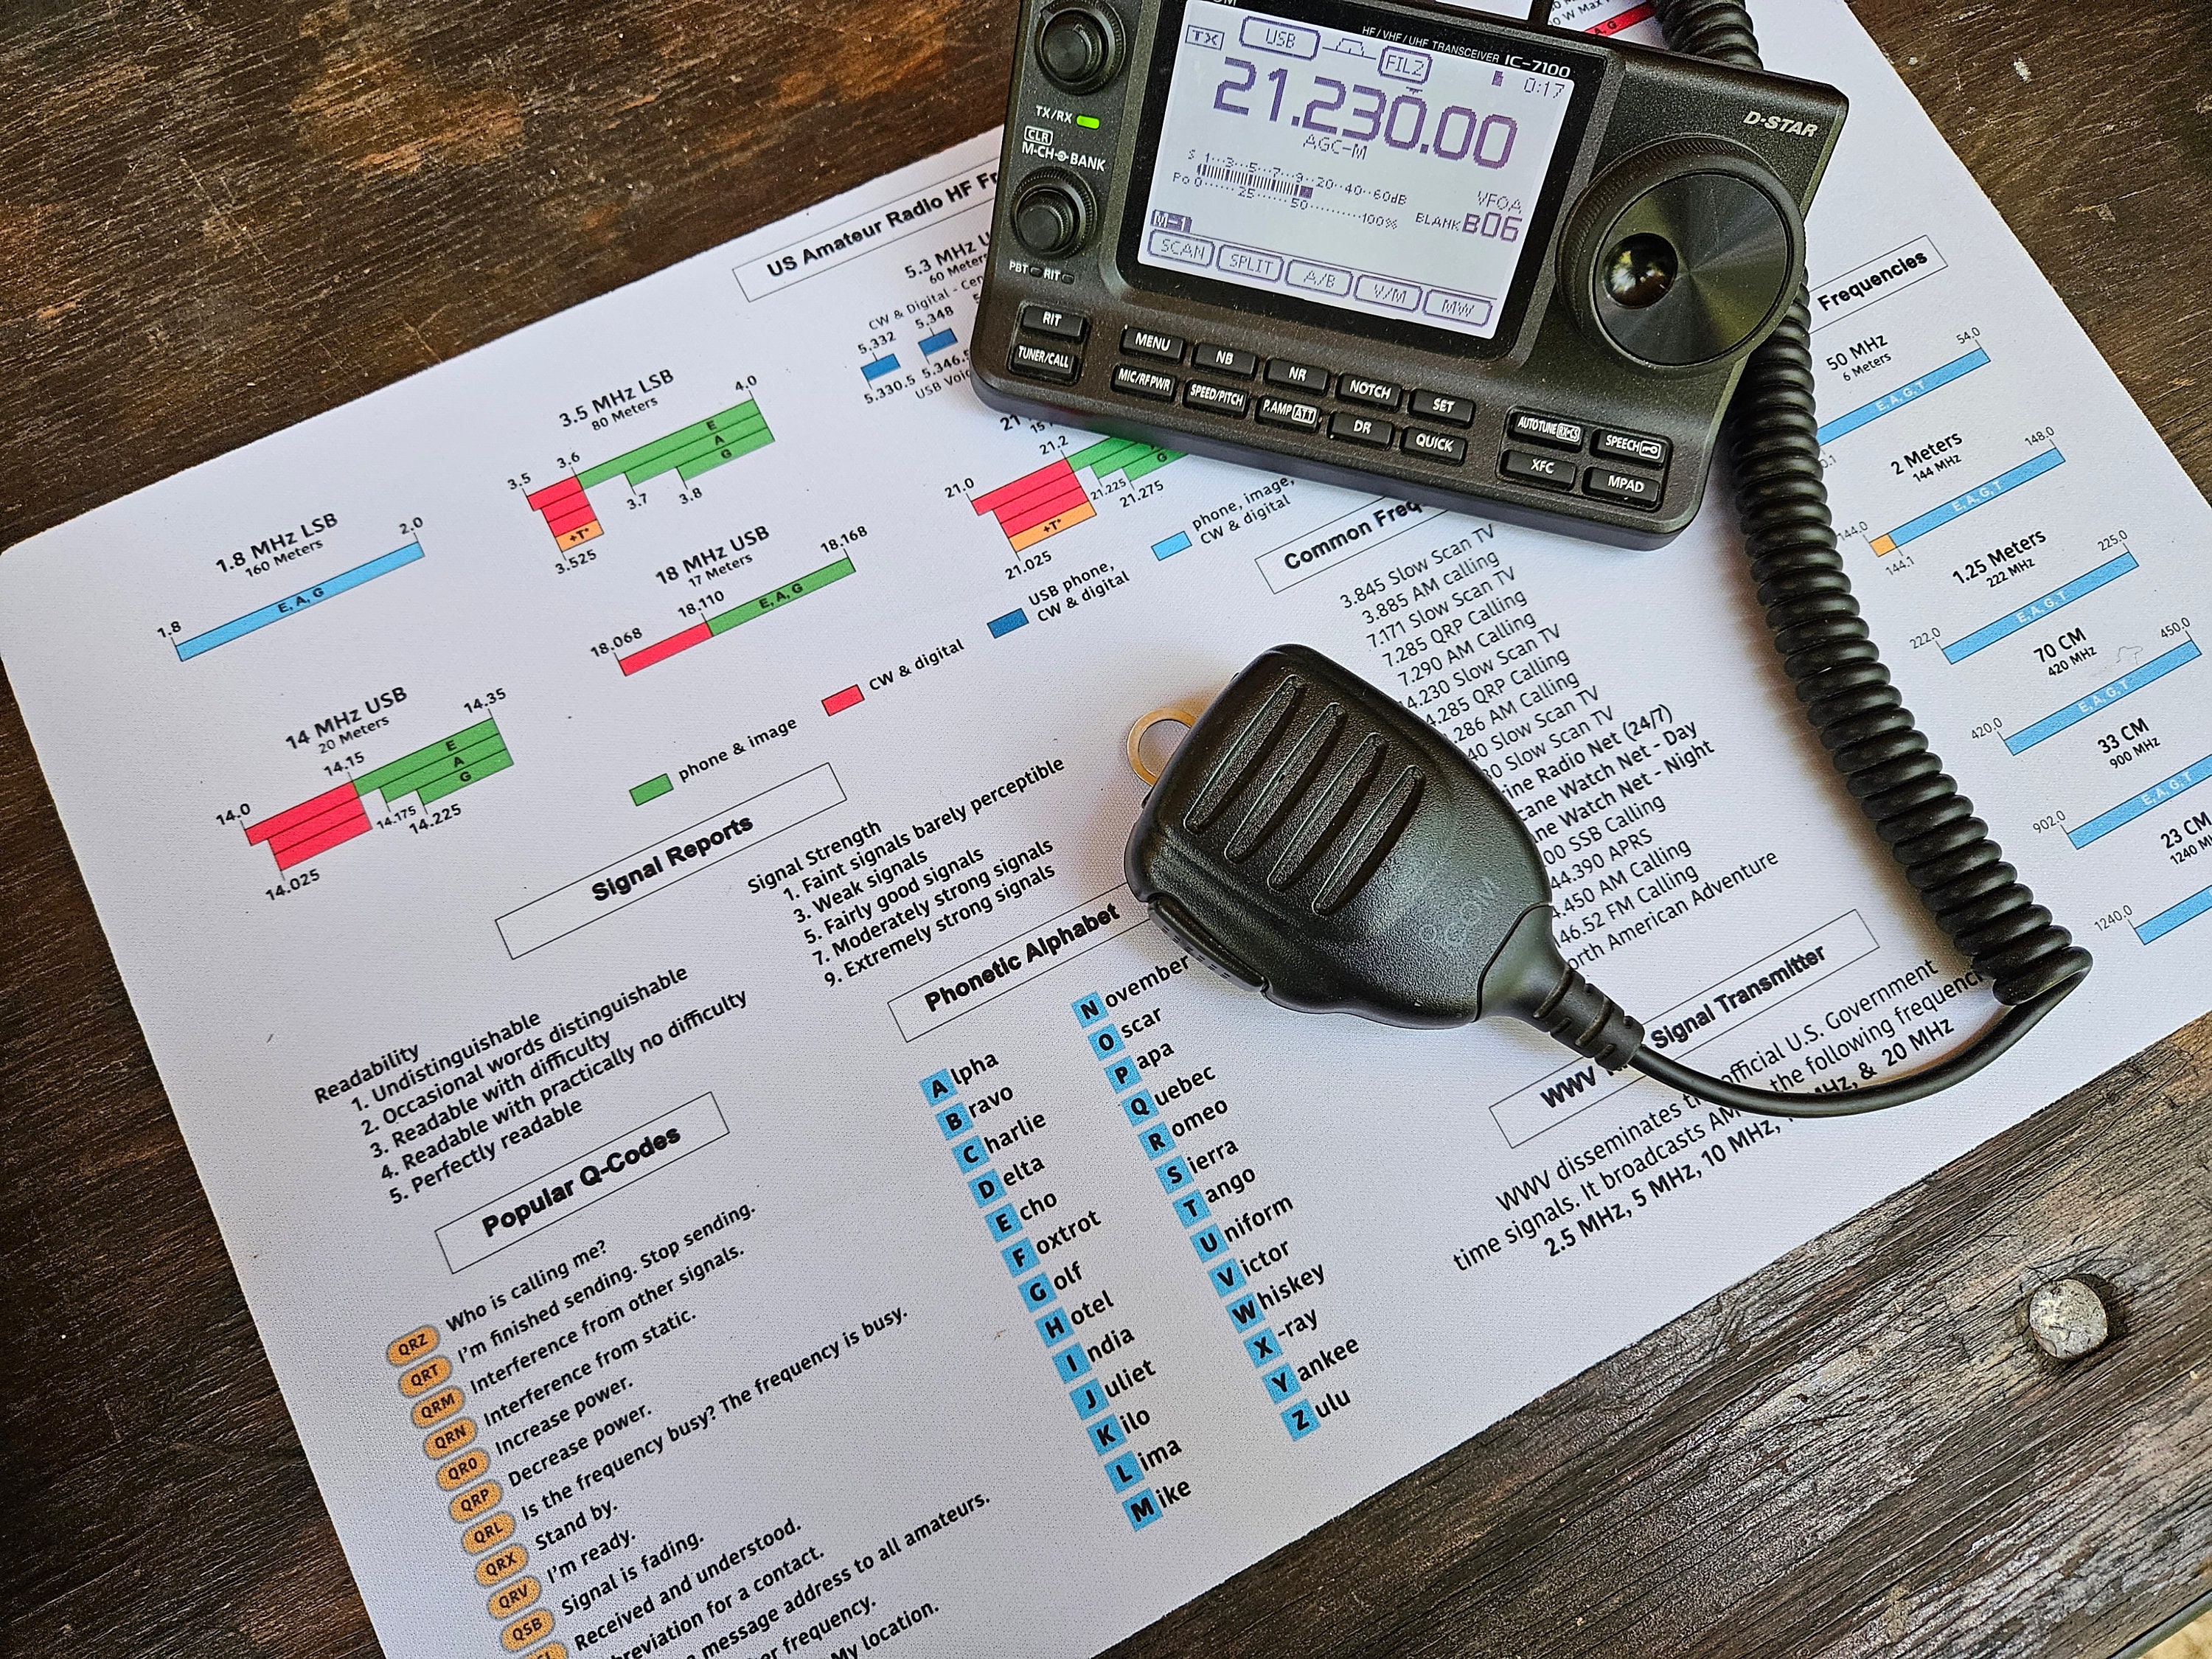 My experiences with digital amateur radio, GO-boxes and QRP